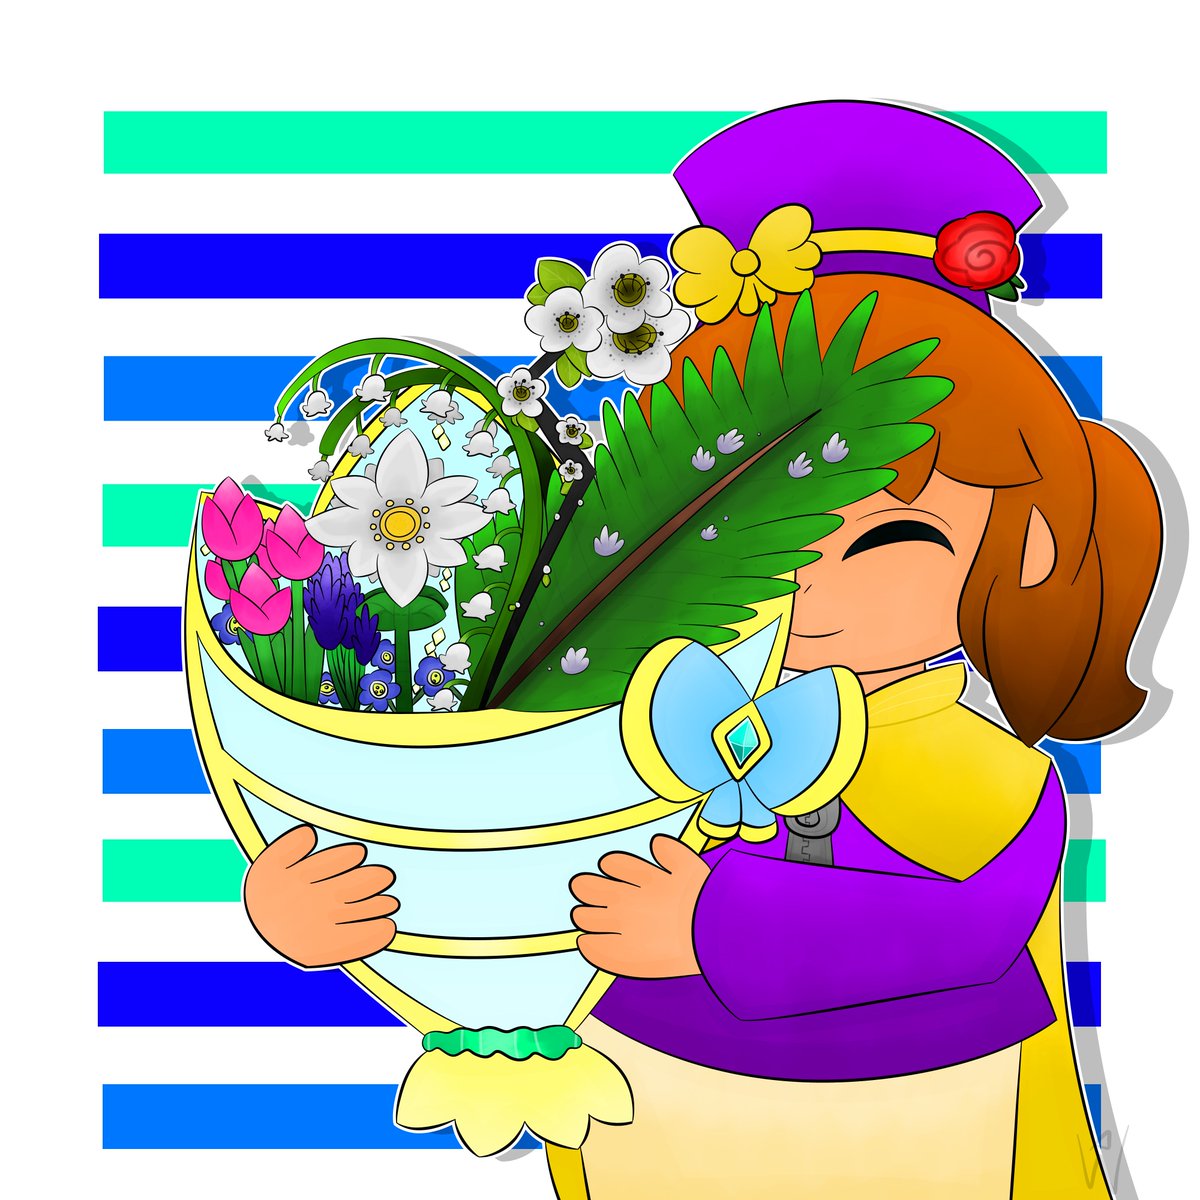 flowers :D

(edelweiss, arborvitae flowers [thuja], pear blossom, lily of the valley, pink tulip, veronica [speedwell] flowers)

#AHatinTime #ahit #ahitfanart